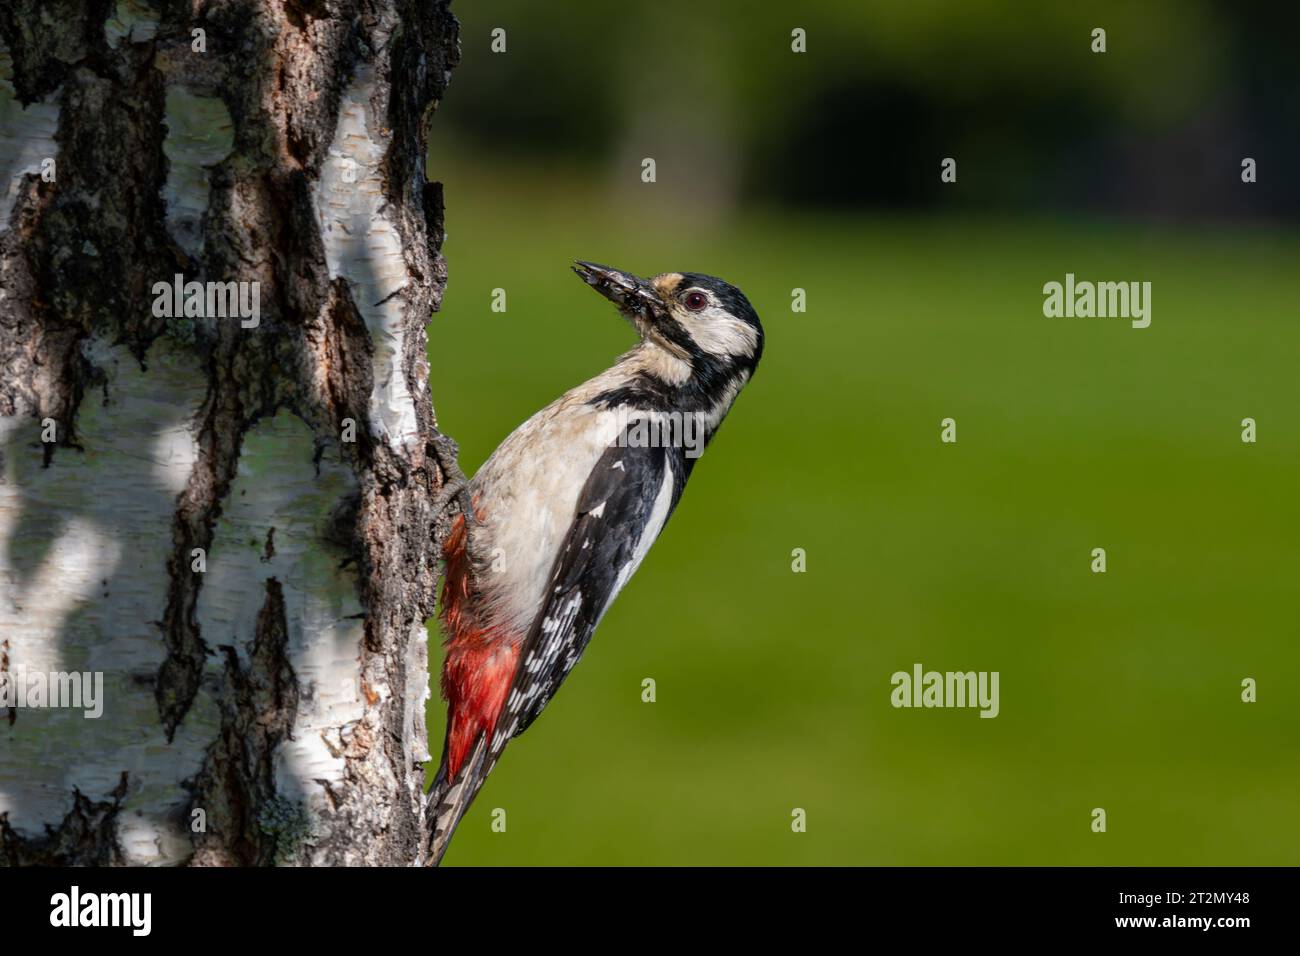 Great spotted woodpecker on tree Stock Photo